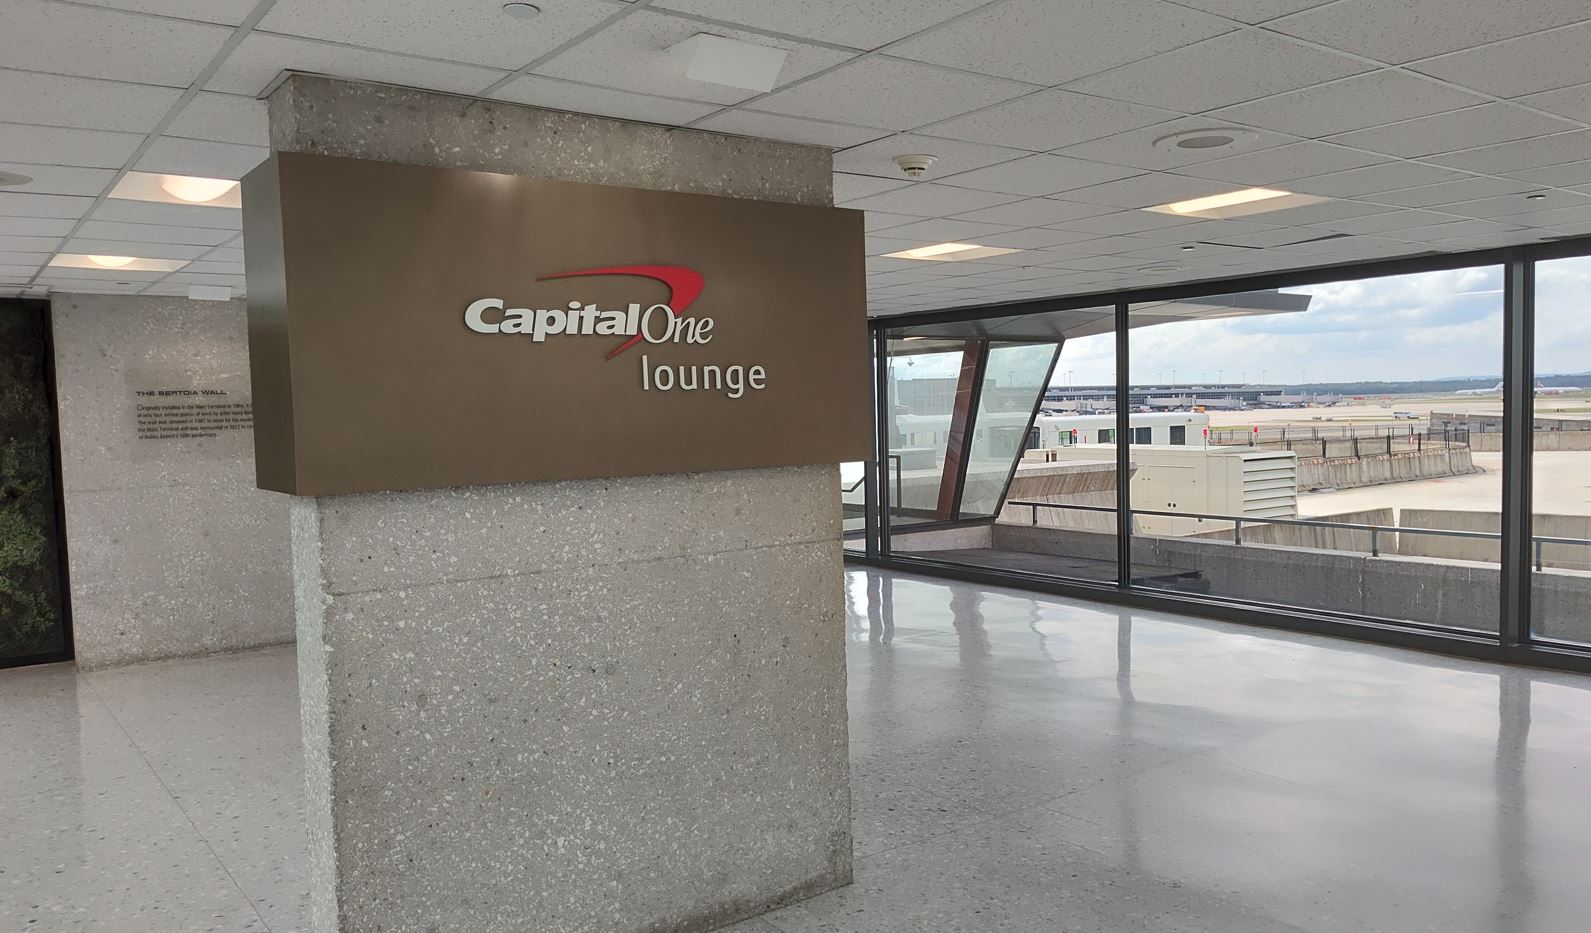 Capital One Lounges